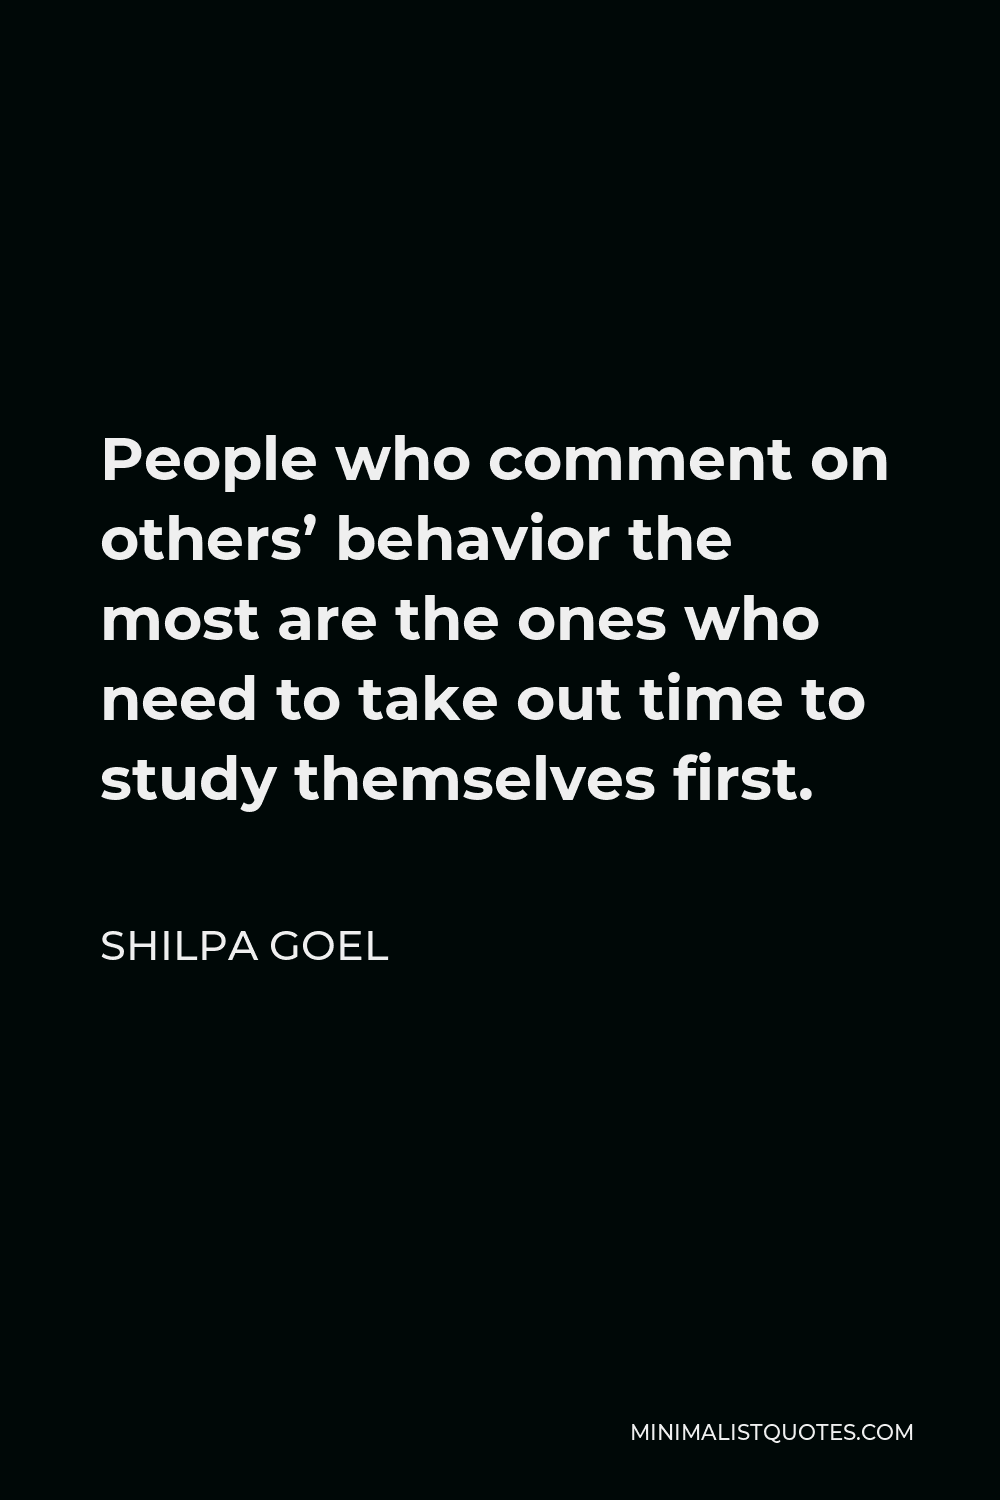 Shilpa Goel Quote - People who comment on others’ behavior the most are the ones who need to take out time to study themselves first.